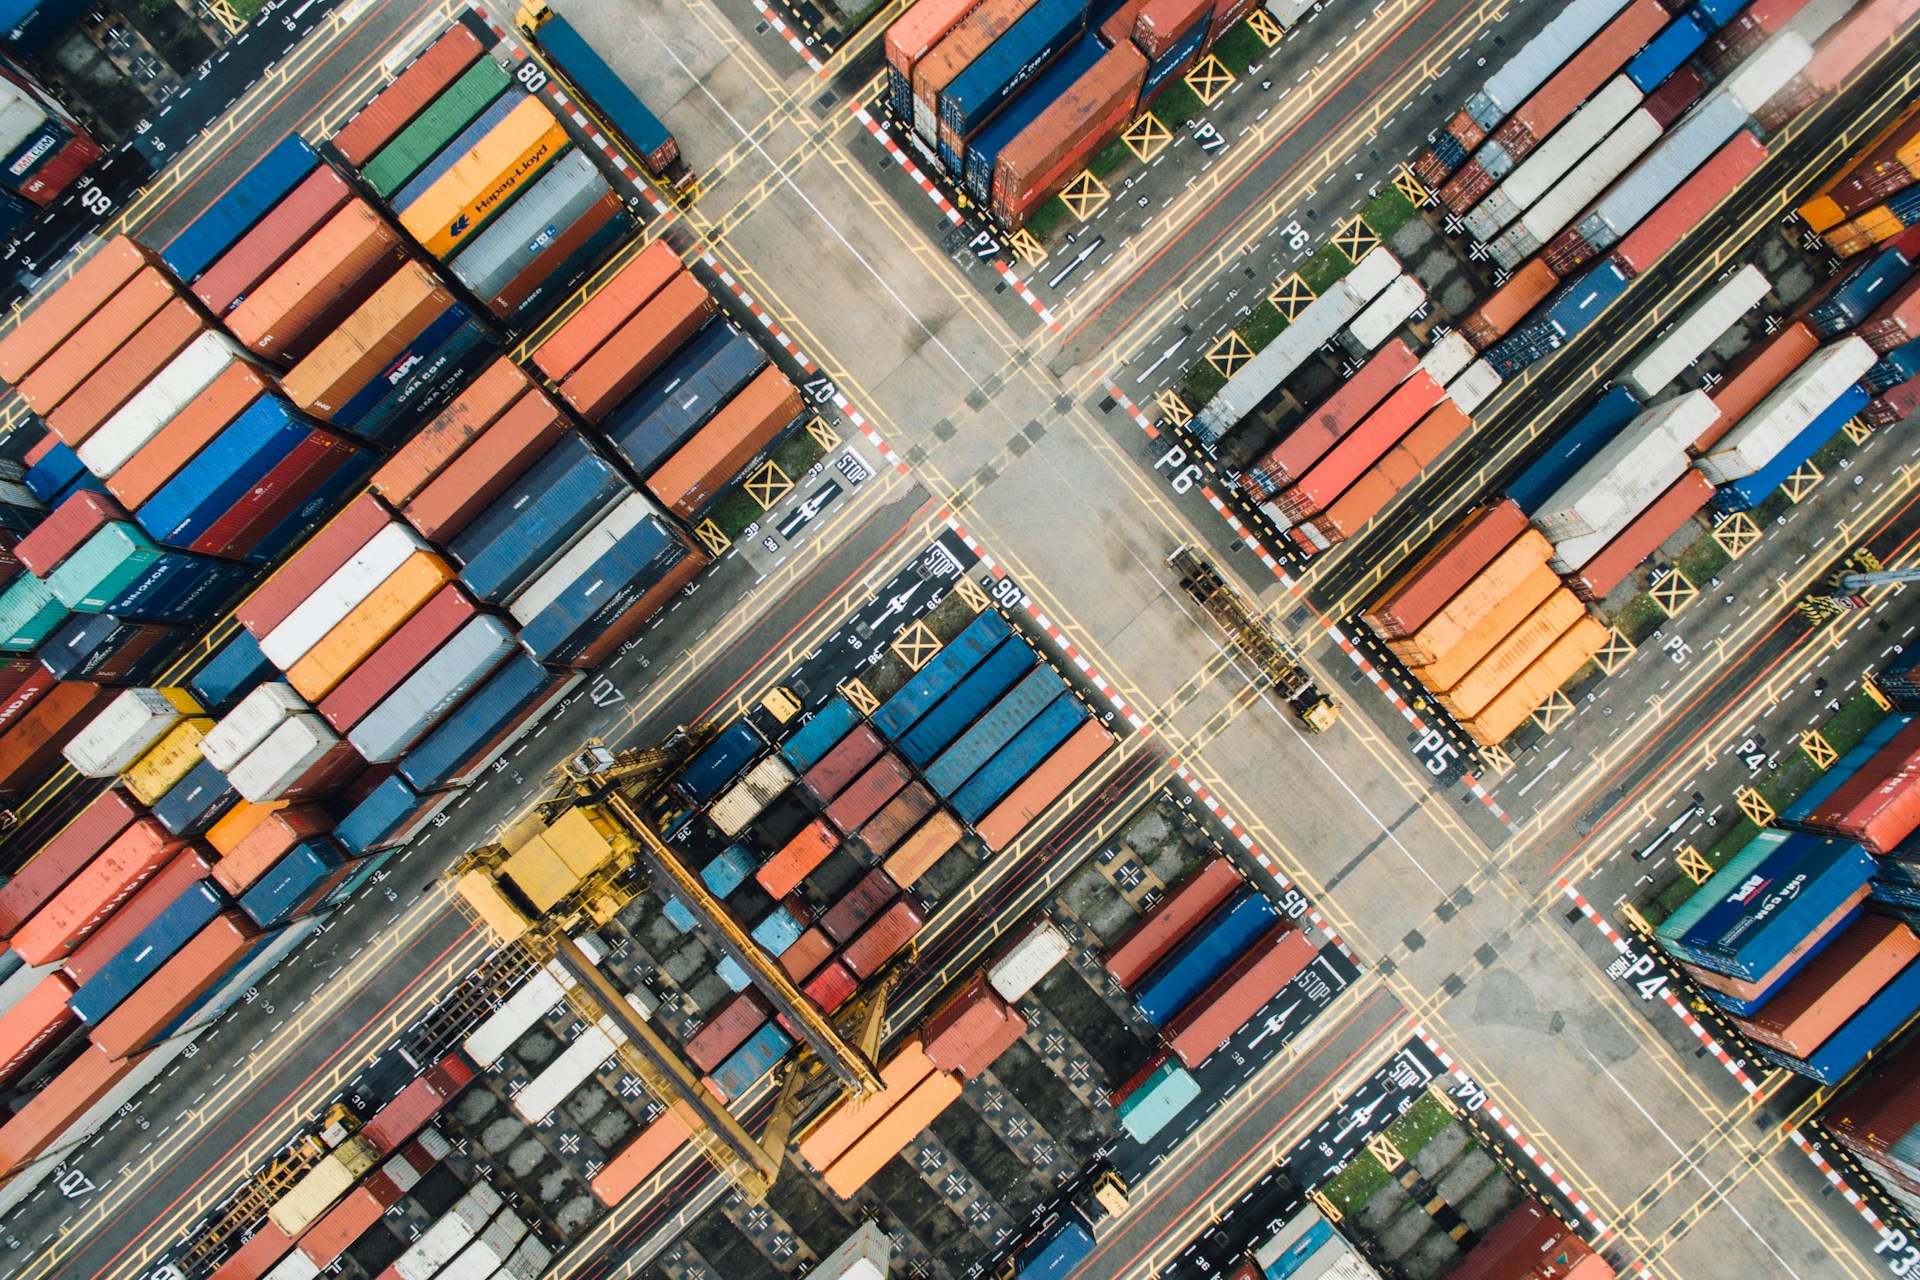 Aerial view of shipping containers in a port